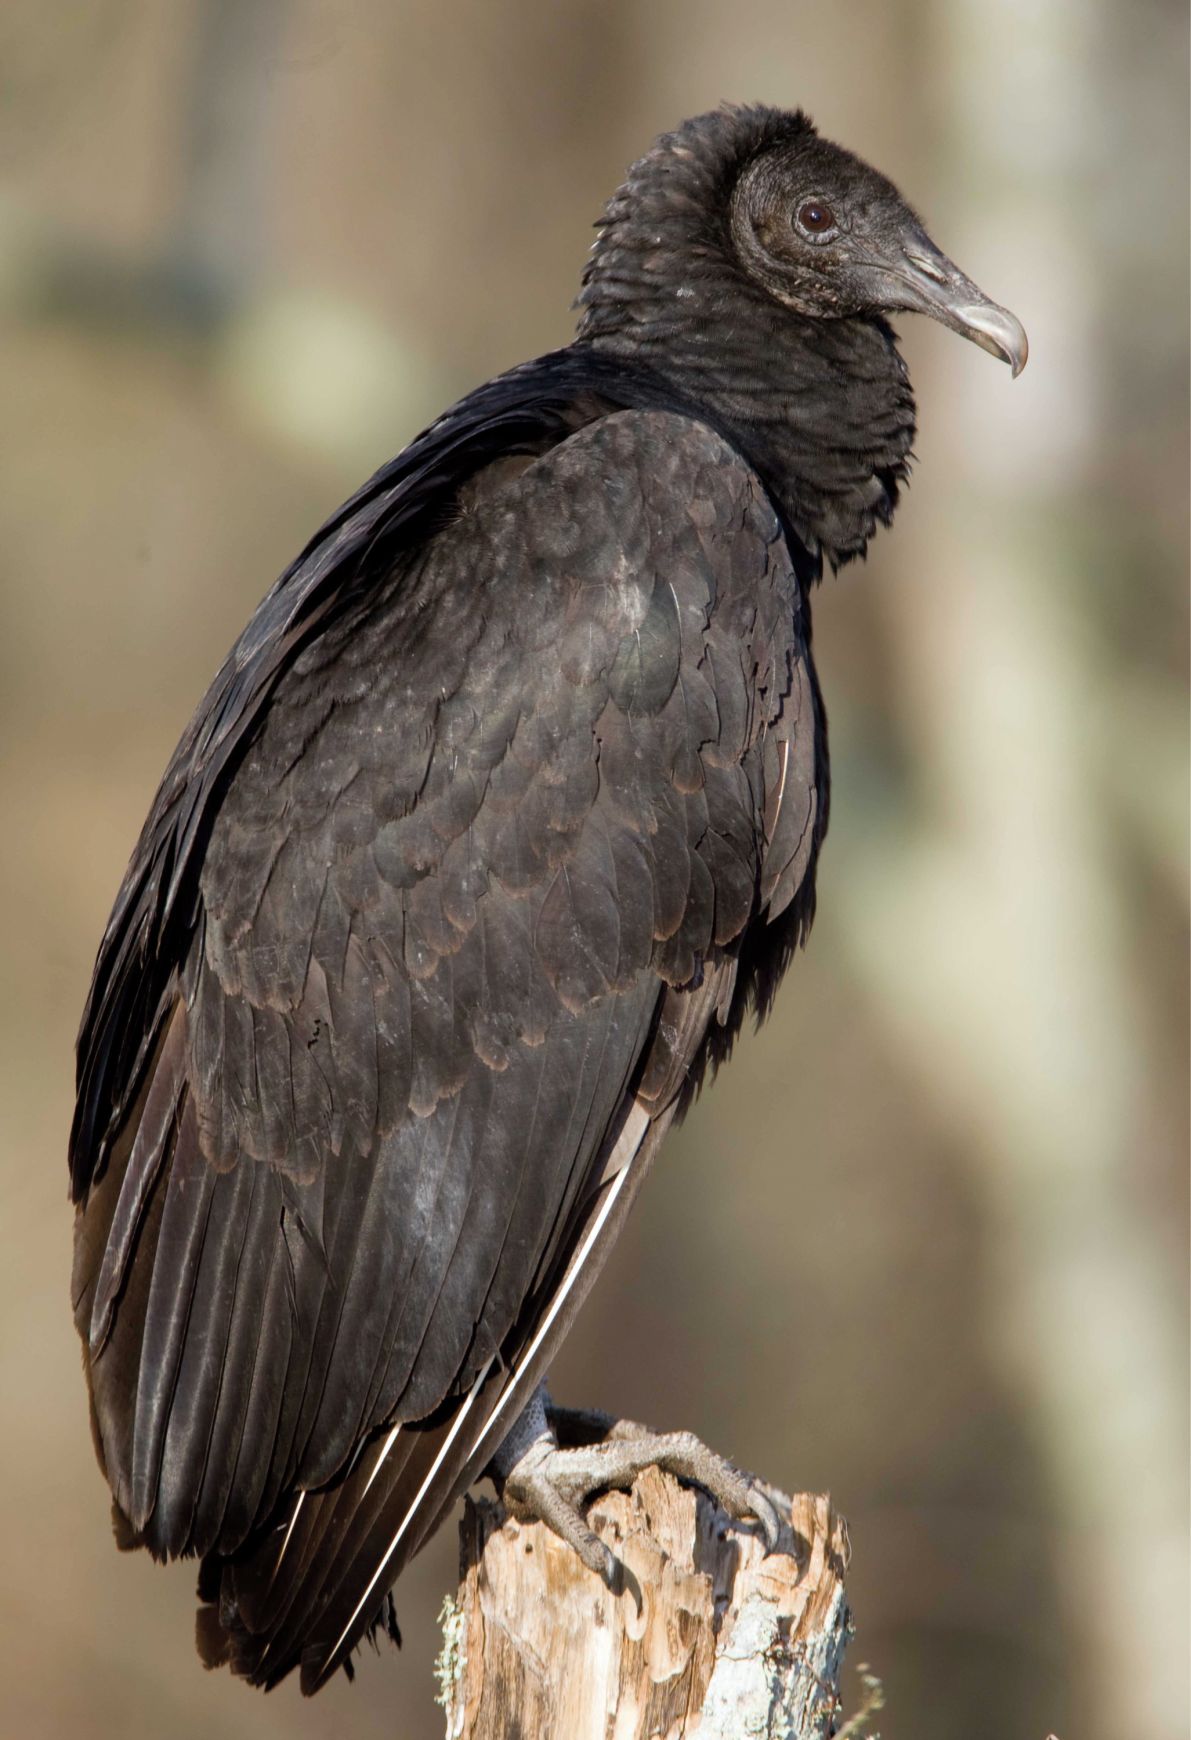 Vultures play vital role | Home And Garden | victoriaadvocate.com